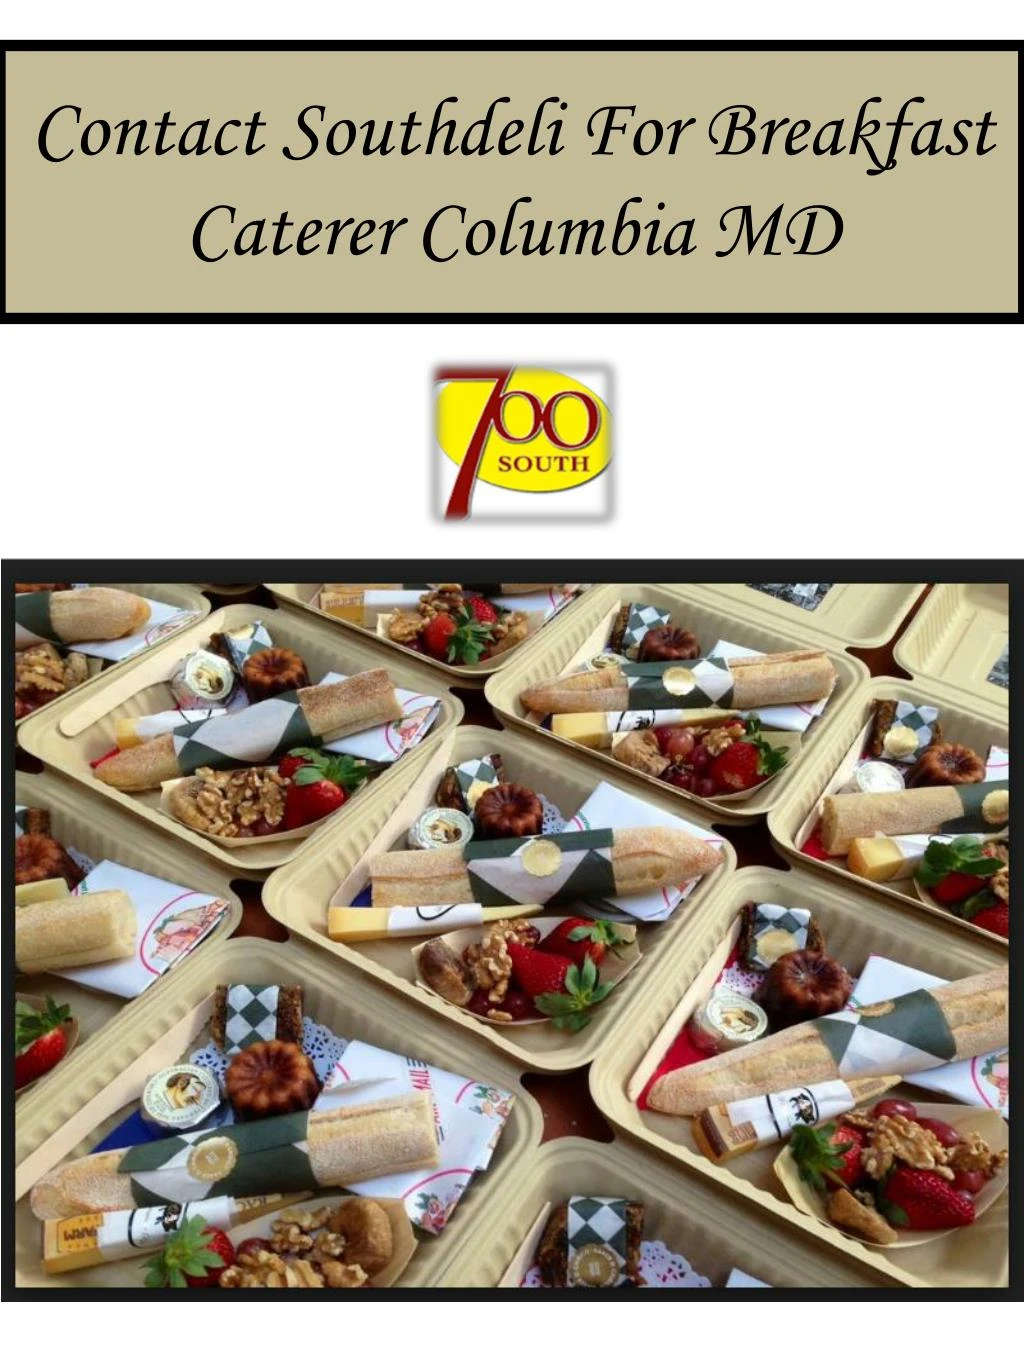 contact southdeli for breakfast caterer columbia md